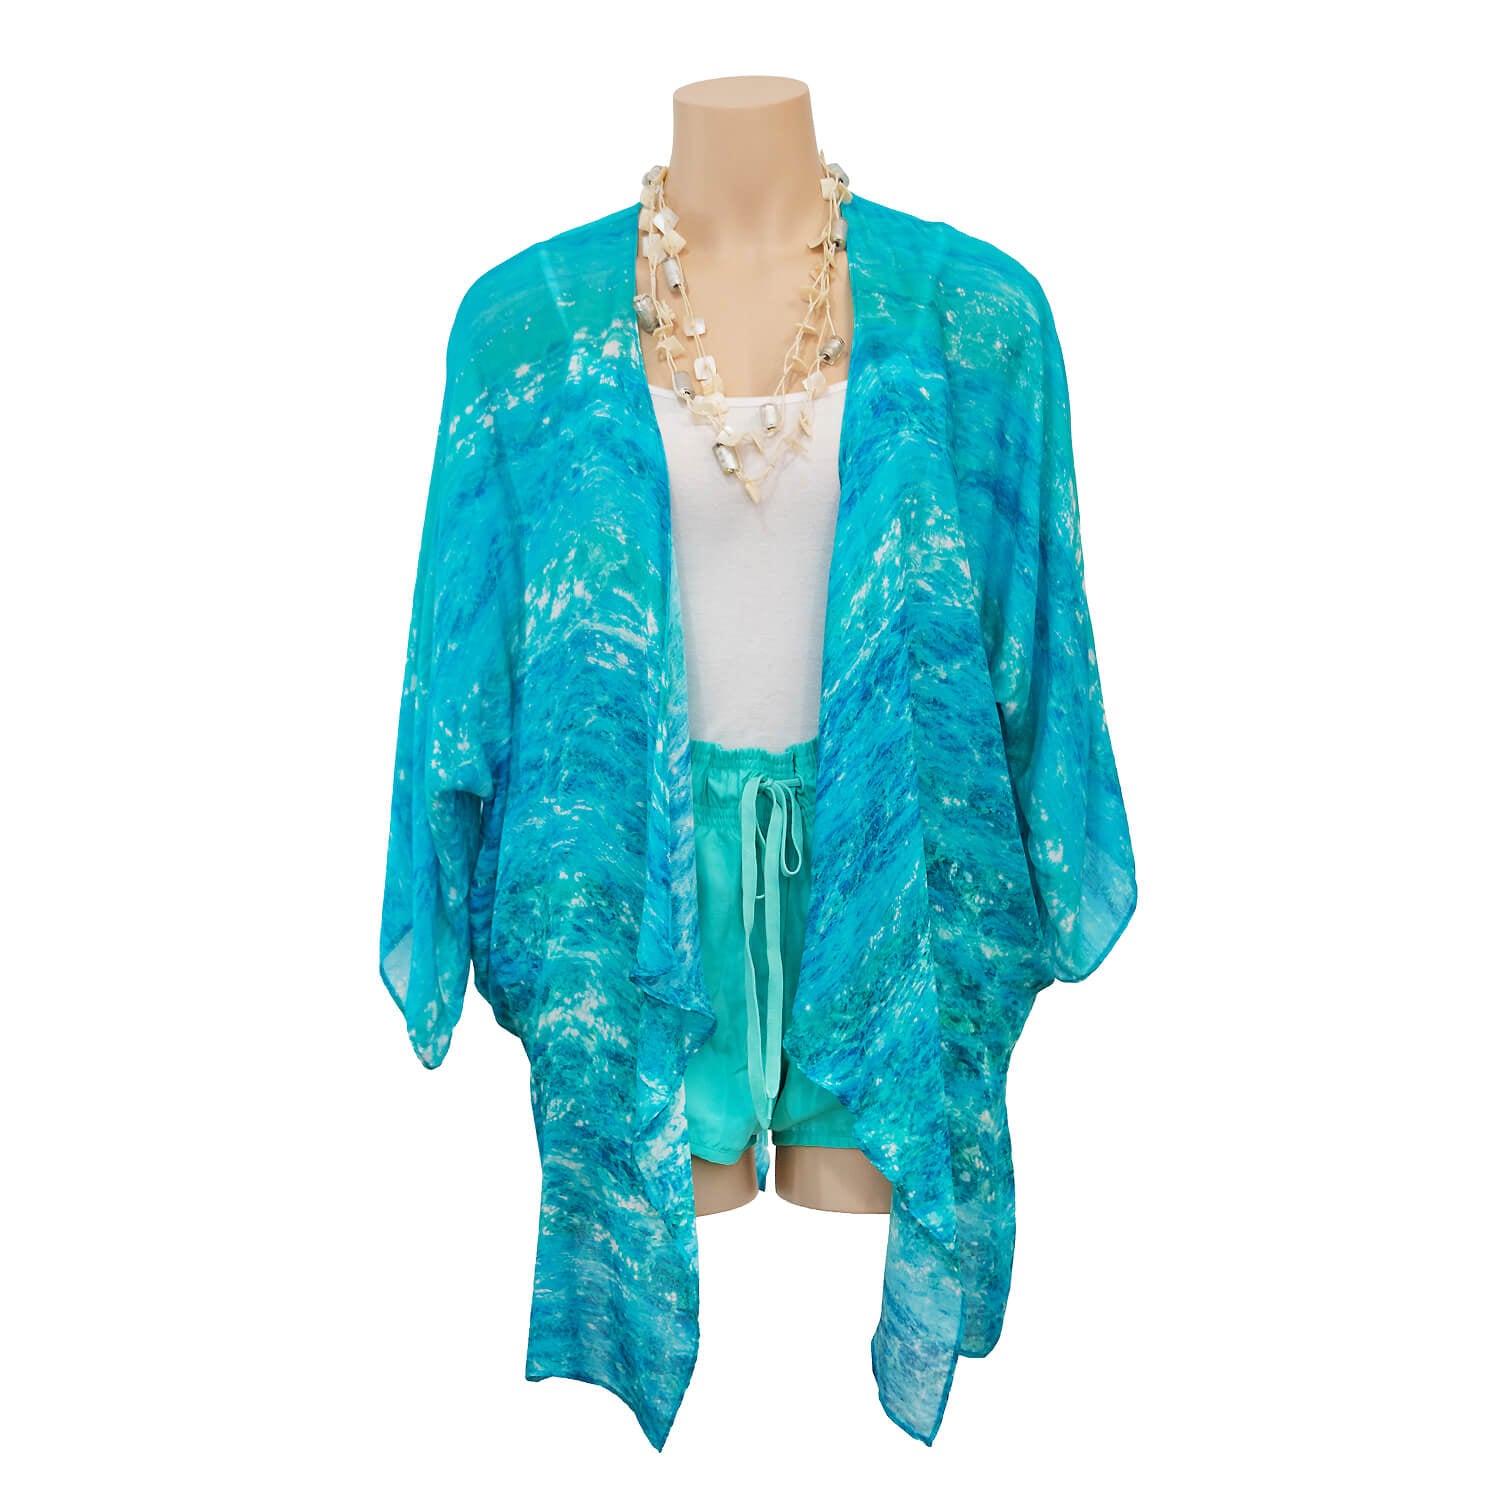 turquoise bay waterfall jacket coverup over aqua shorts by seahorse silks